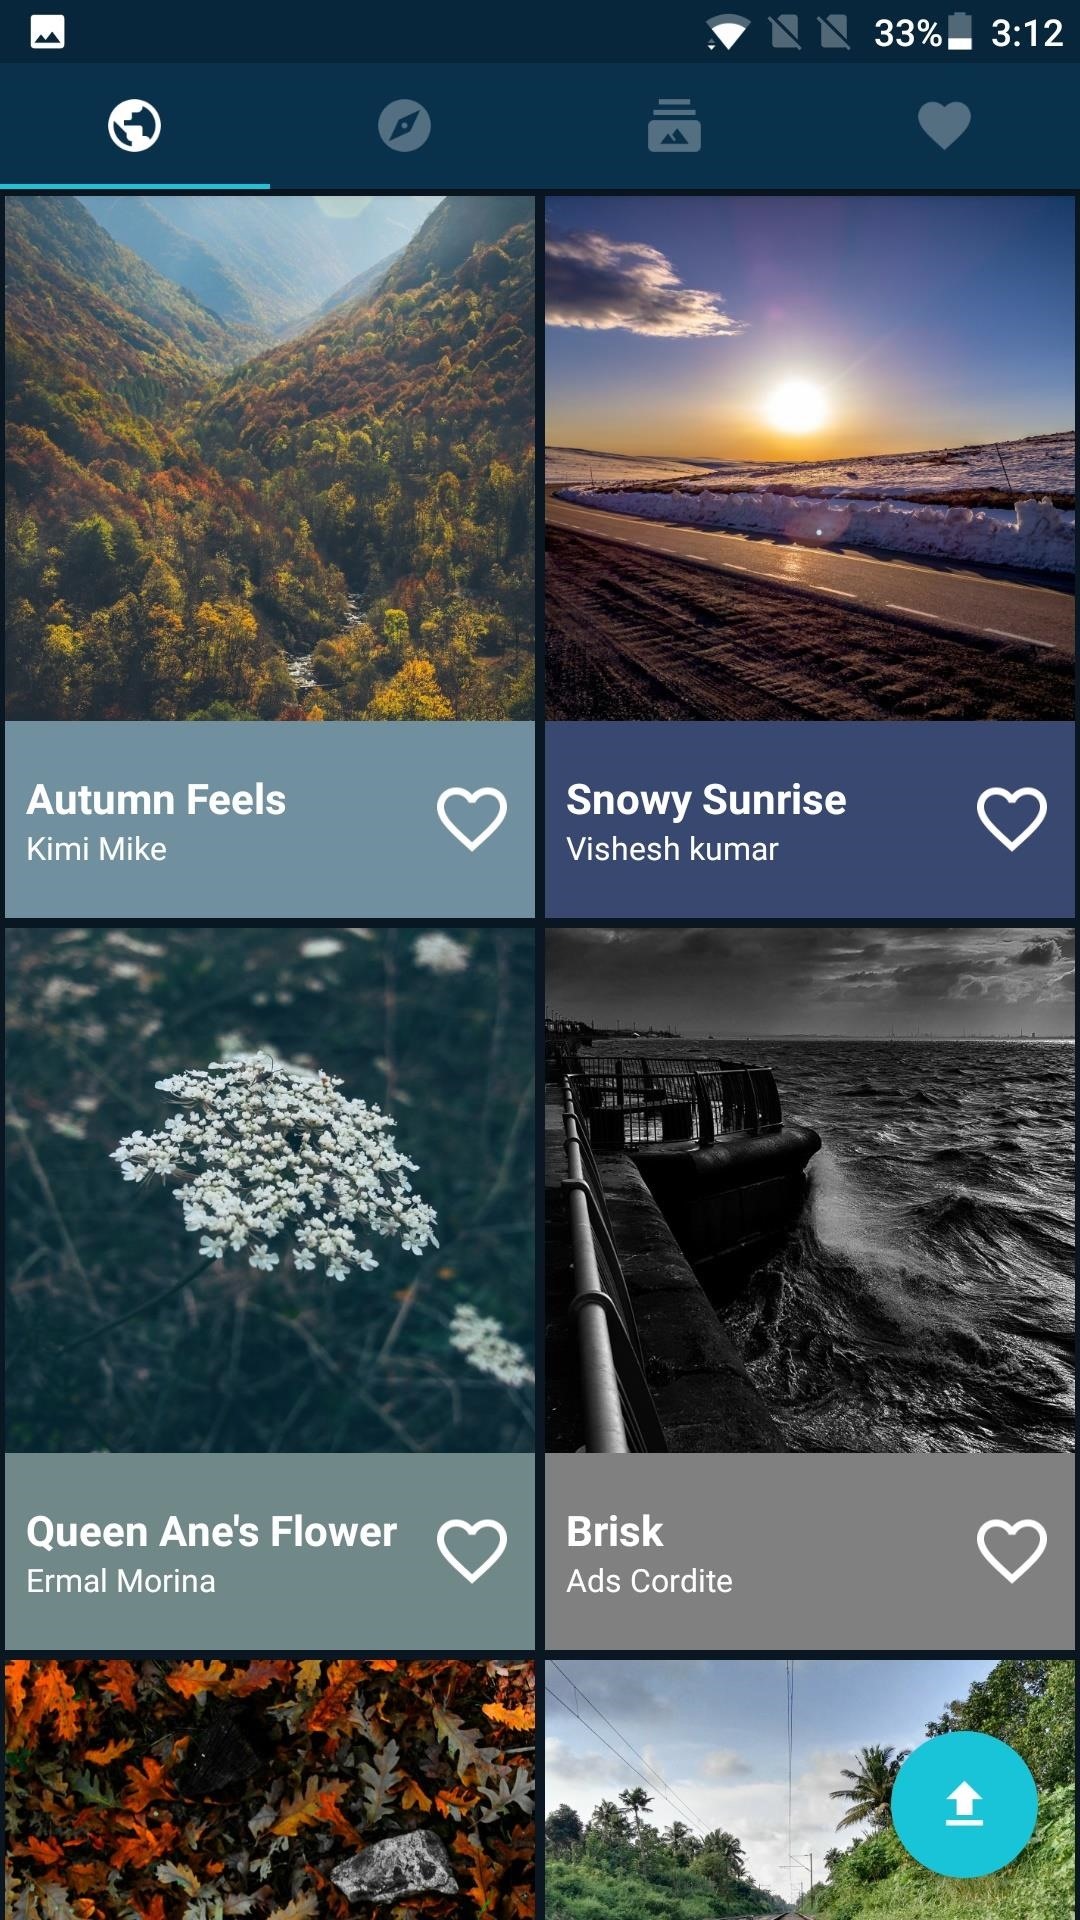 Top 7 Free Wallpaper Apps for Android Phones & Tablets